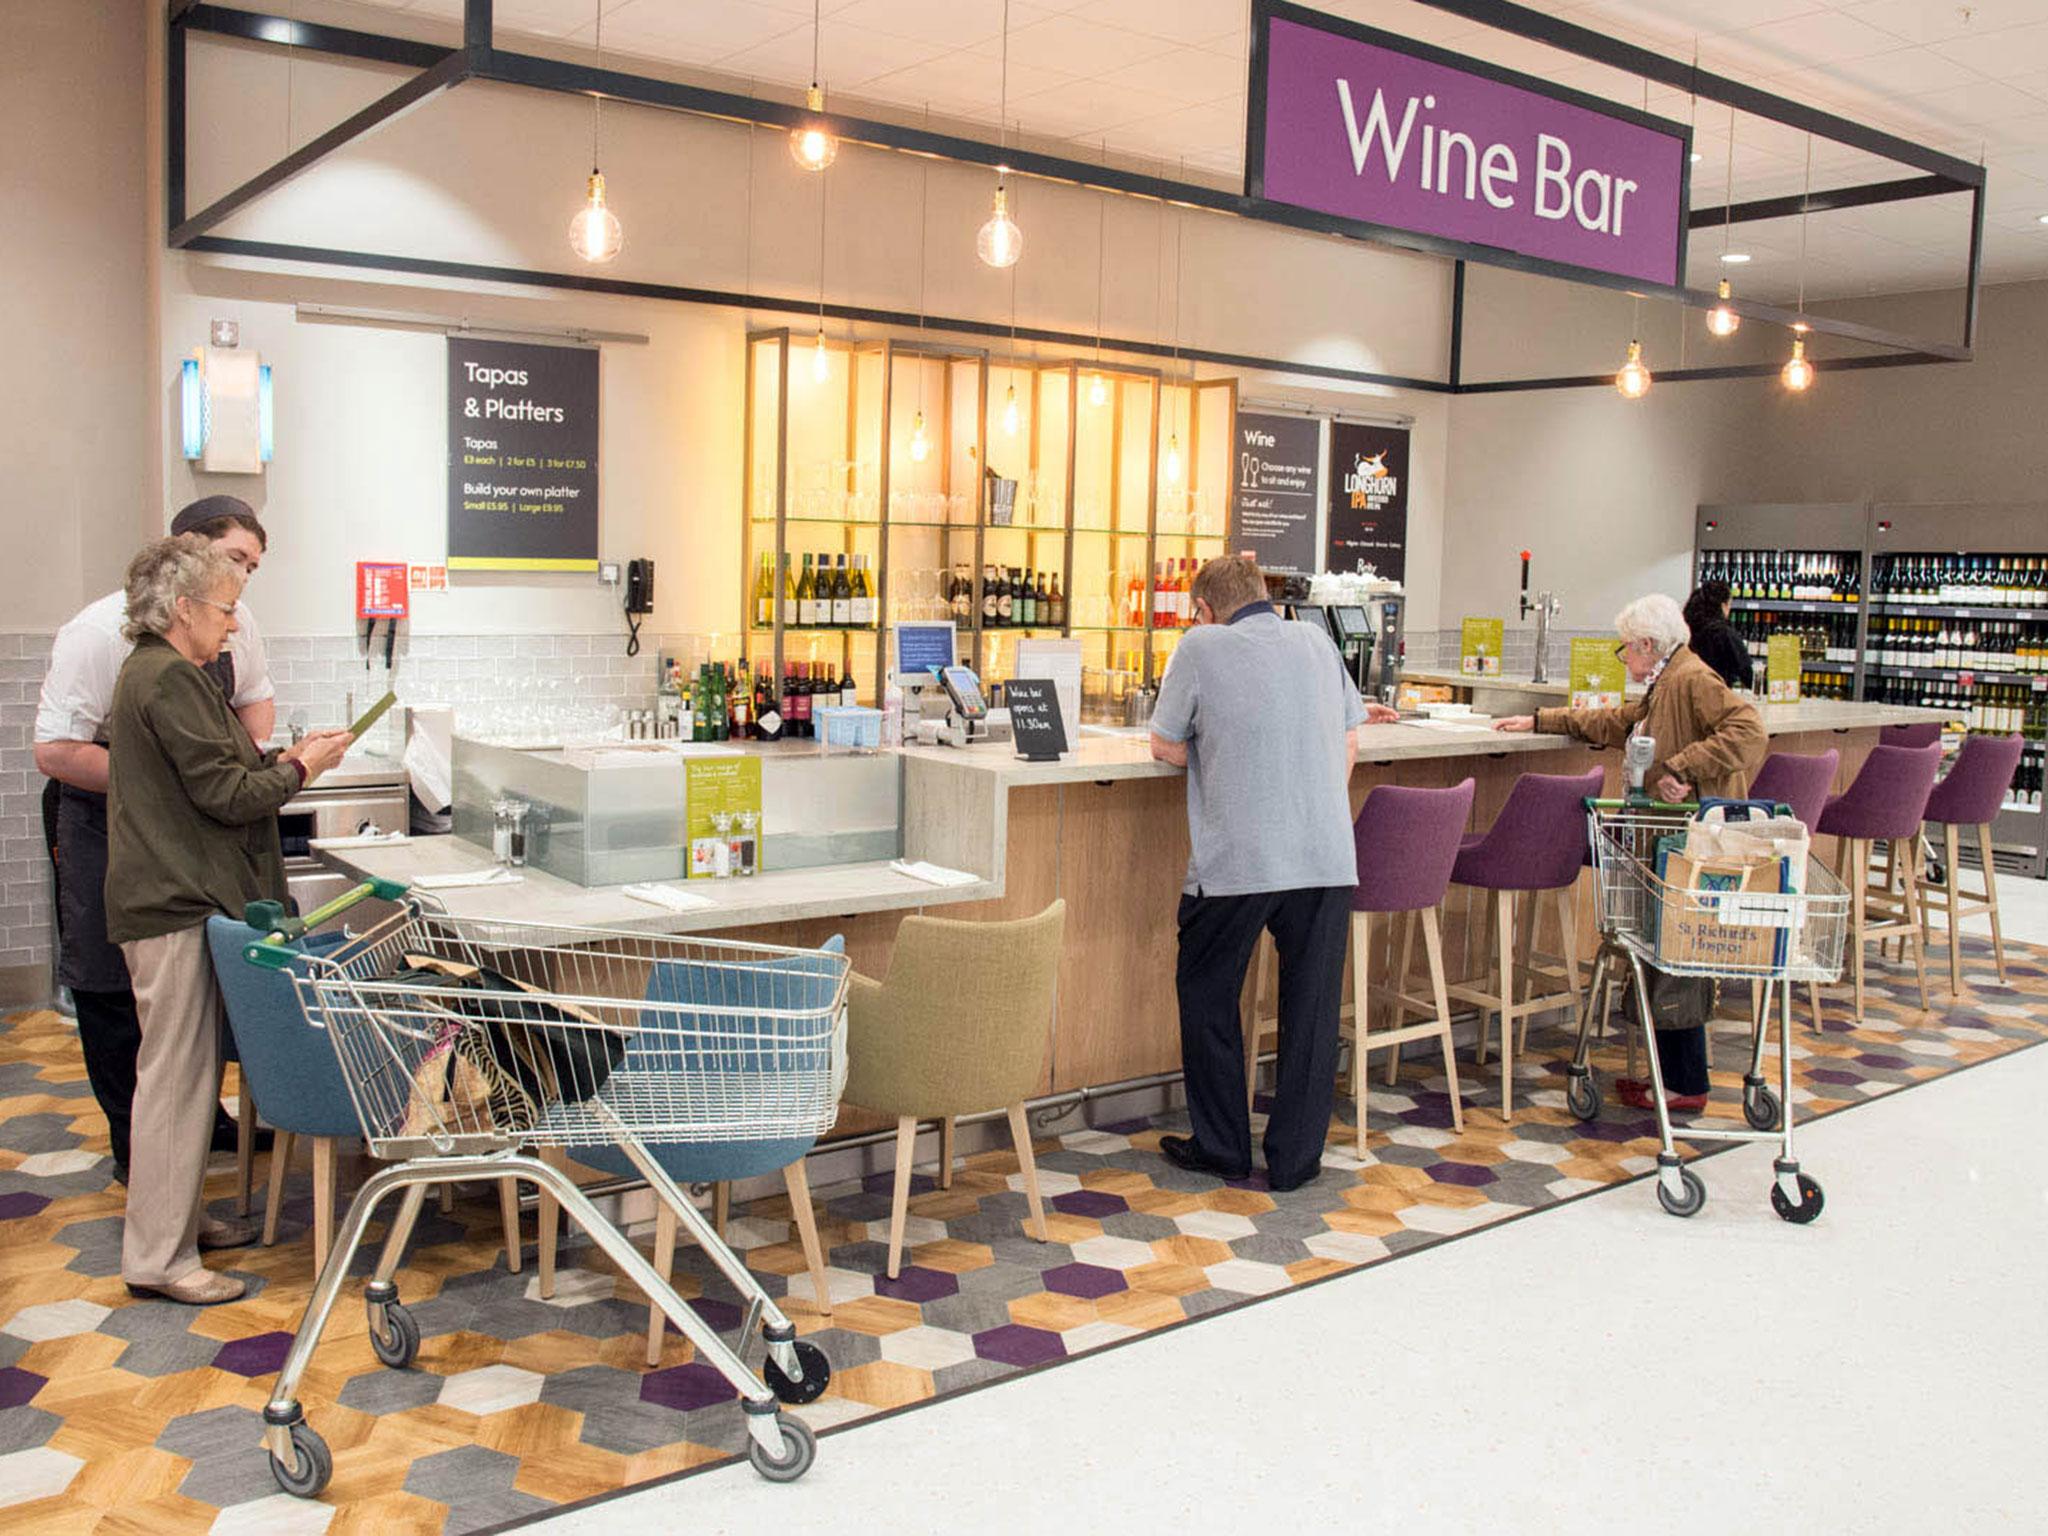 Waitrose ‘hospitality’ sales from more than 200 in-store cafes, bakeries, wine and juice bars rose 7.1 per cent in the first half of the financial year